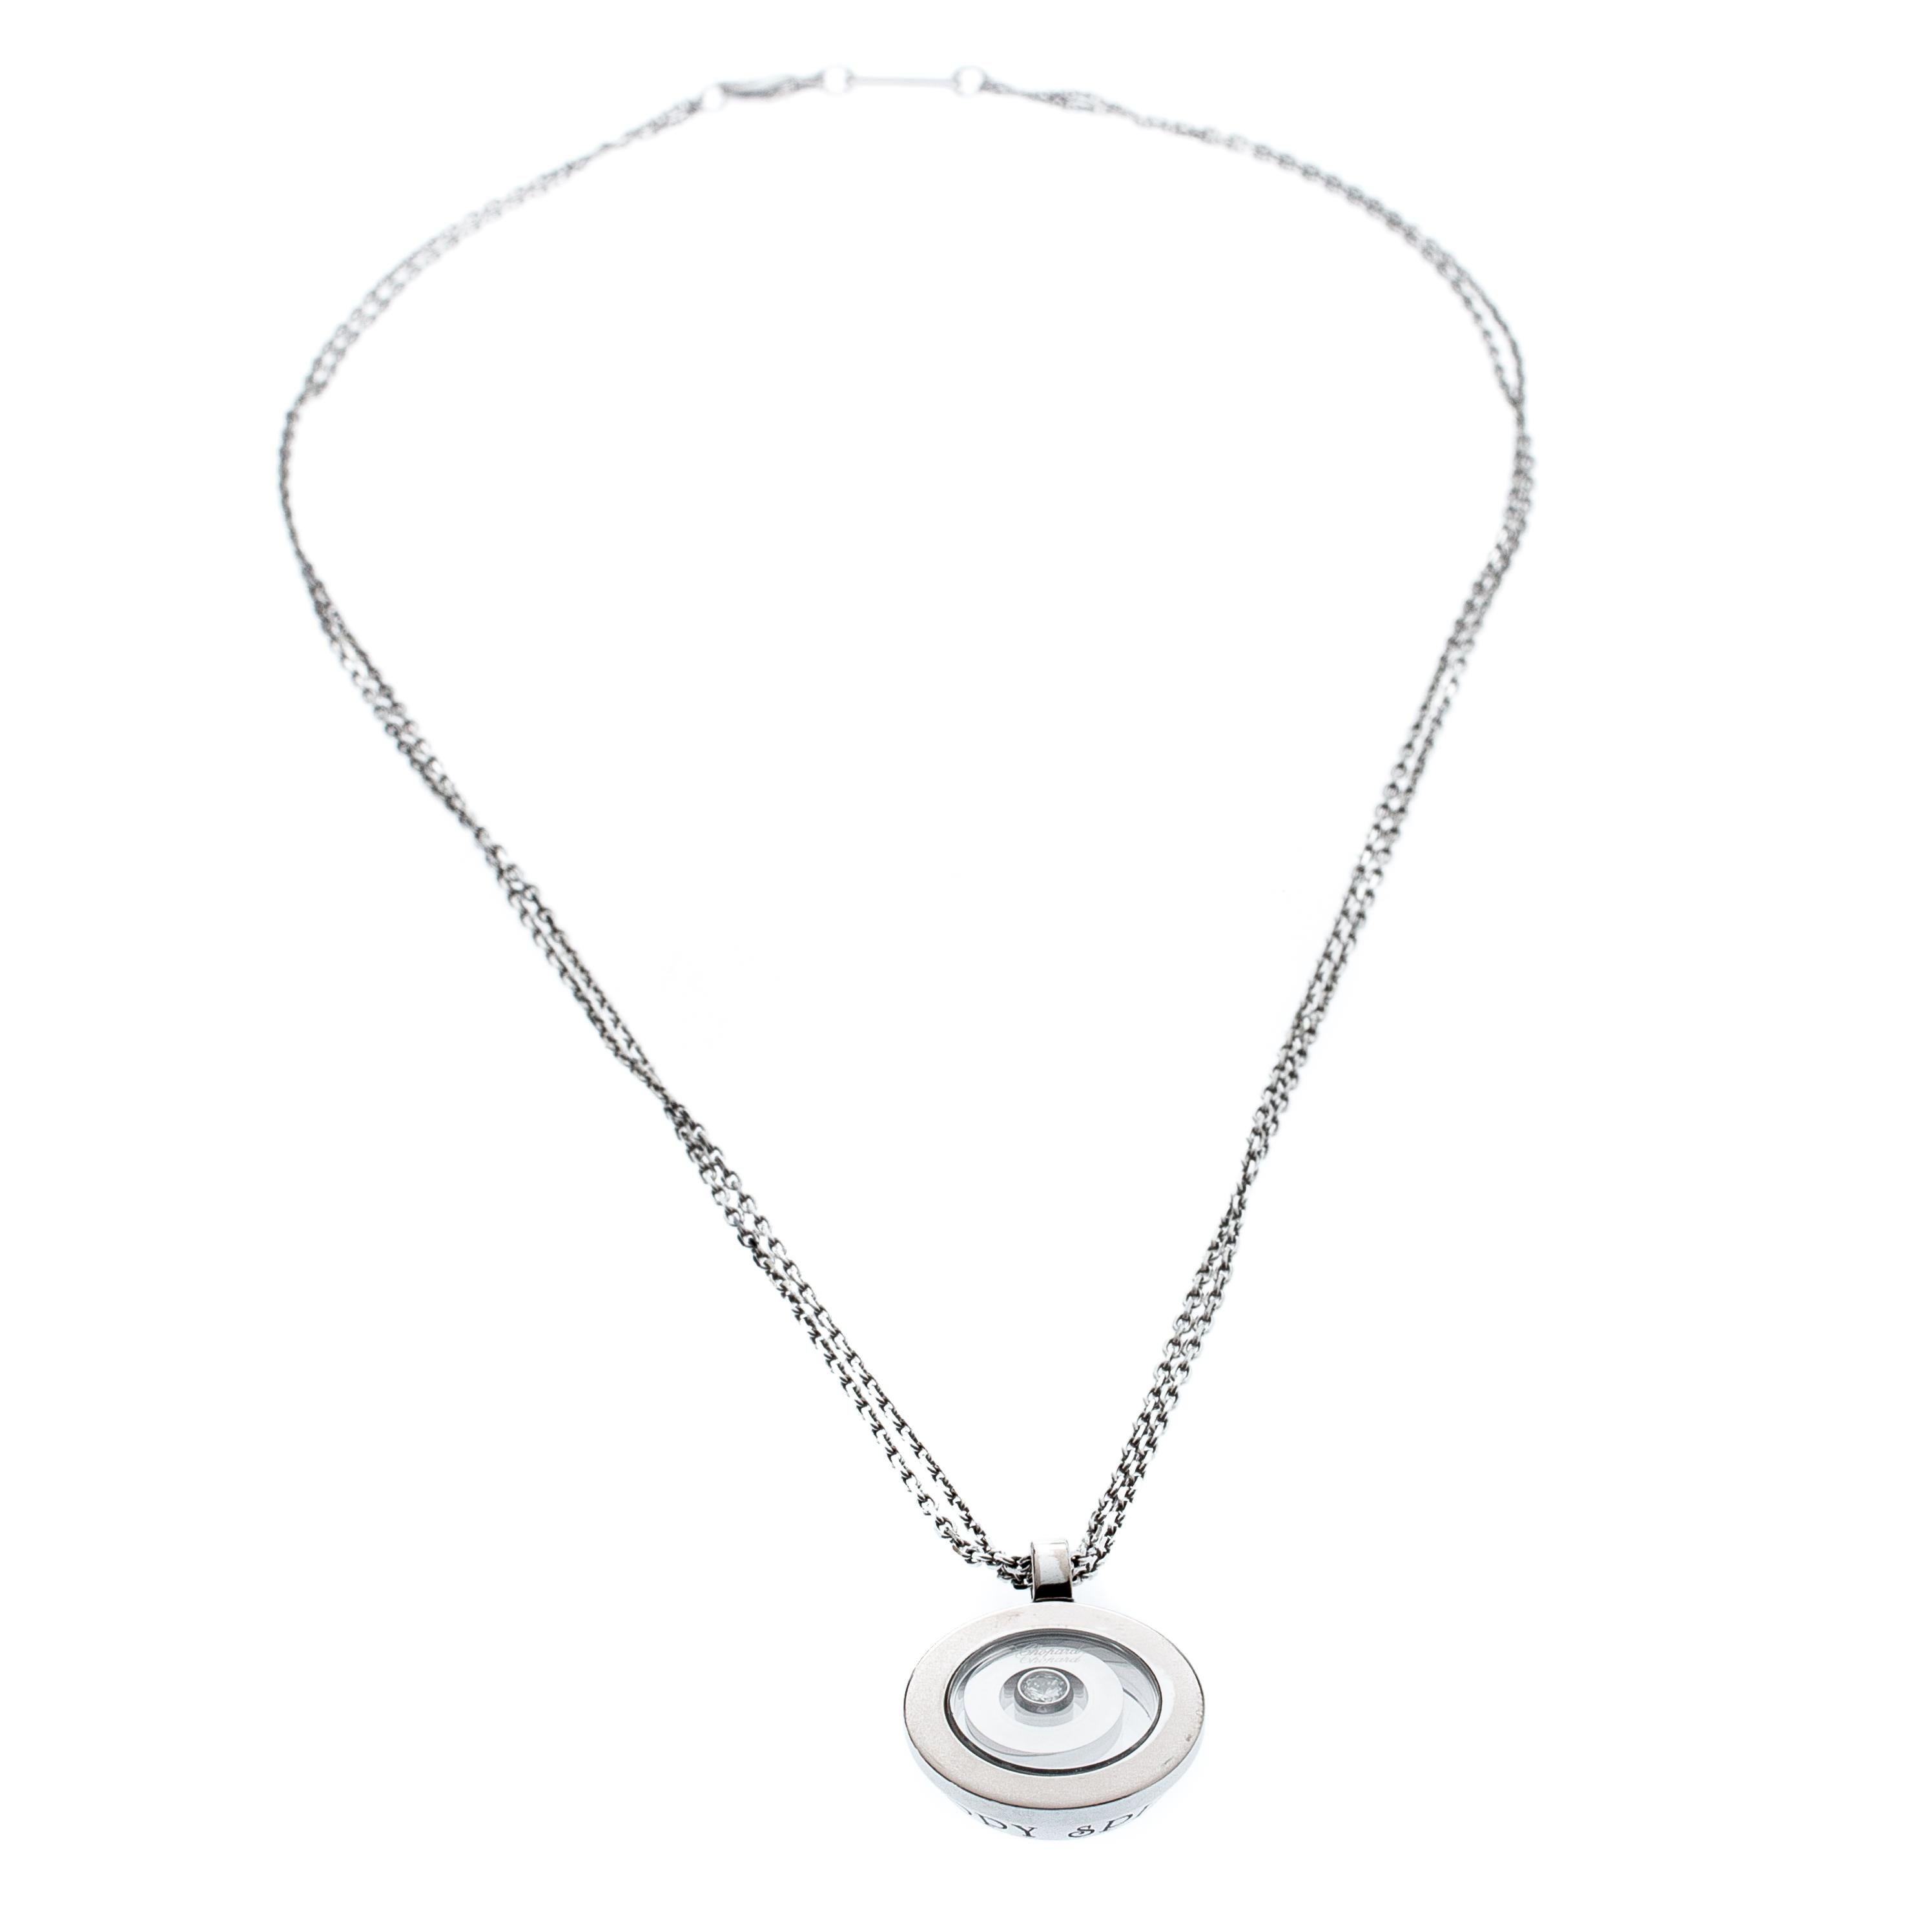 Unique and playful, this necklace from the Happy Spirit collection of Chopard is an elegant piece desirable by fashion-forward women. These are immaculately crafted in 18K white gold with a minimalist round pendant which embraces a small diamond